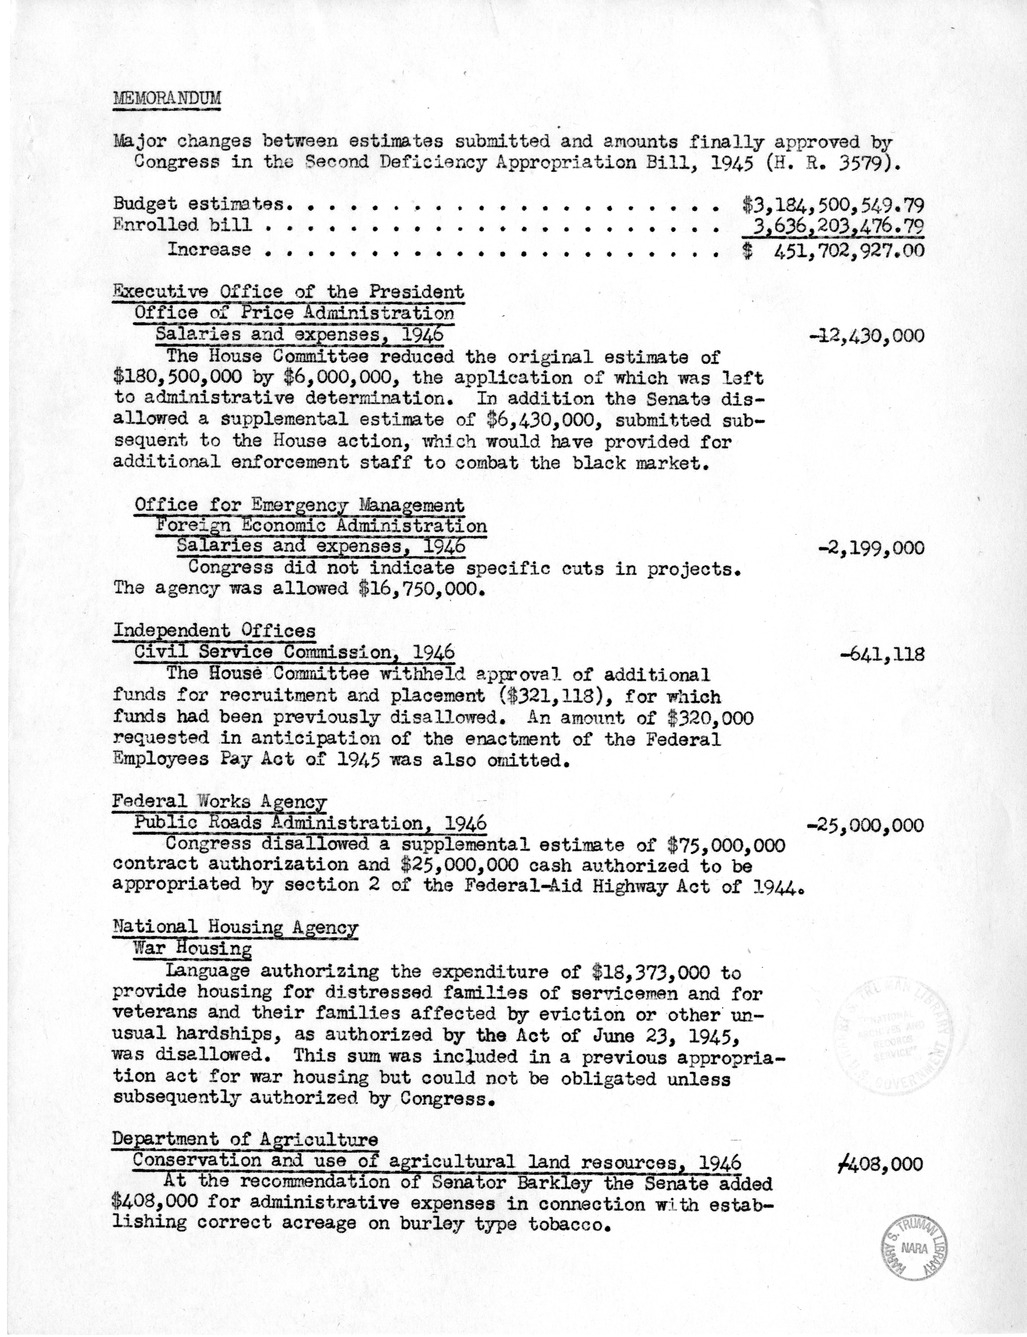 Memorandum from Harold D. Smith to M. C. Latta, H.R. 3579, Making Appropriations to Supply Deficiencies in Certain Appropriations for the Fiscal Year Ending June 30, 1945, and for Prior Fiscal Years, and to Provide Supplemental Appropriations, with Attach